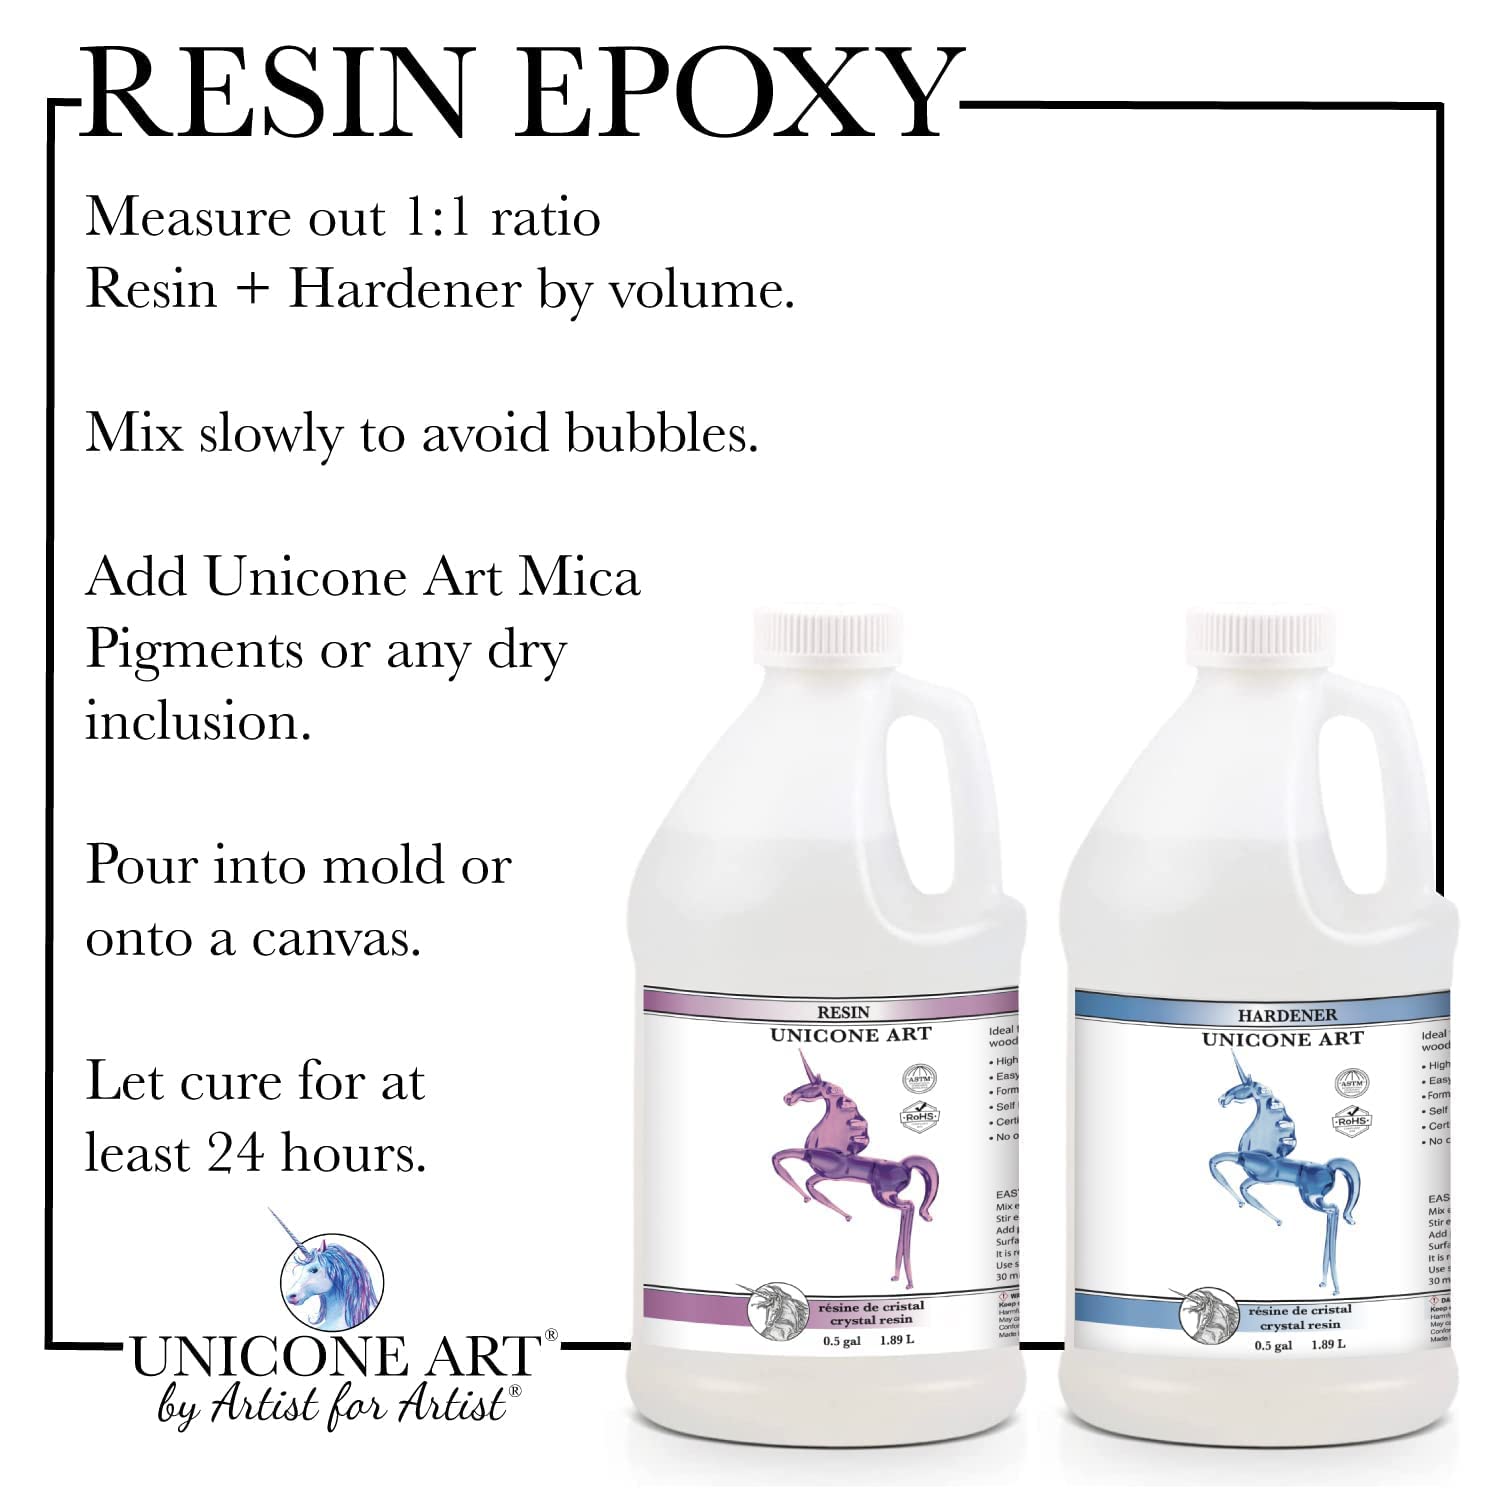 1 gal Epoxy Resin Beginners Kit with Tools